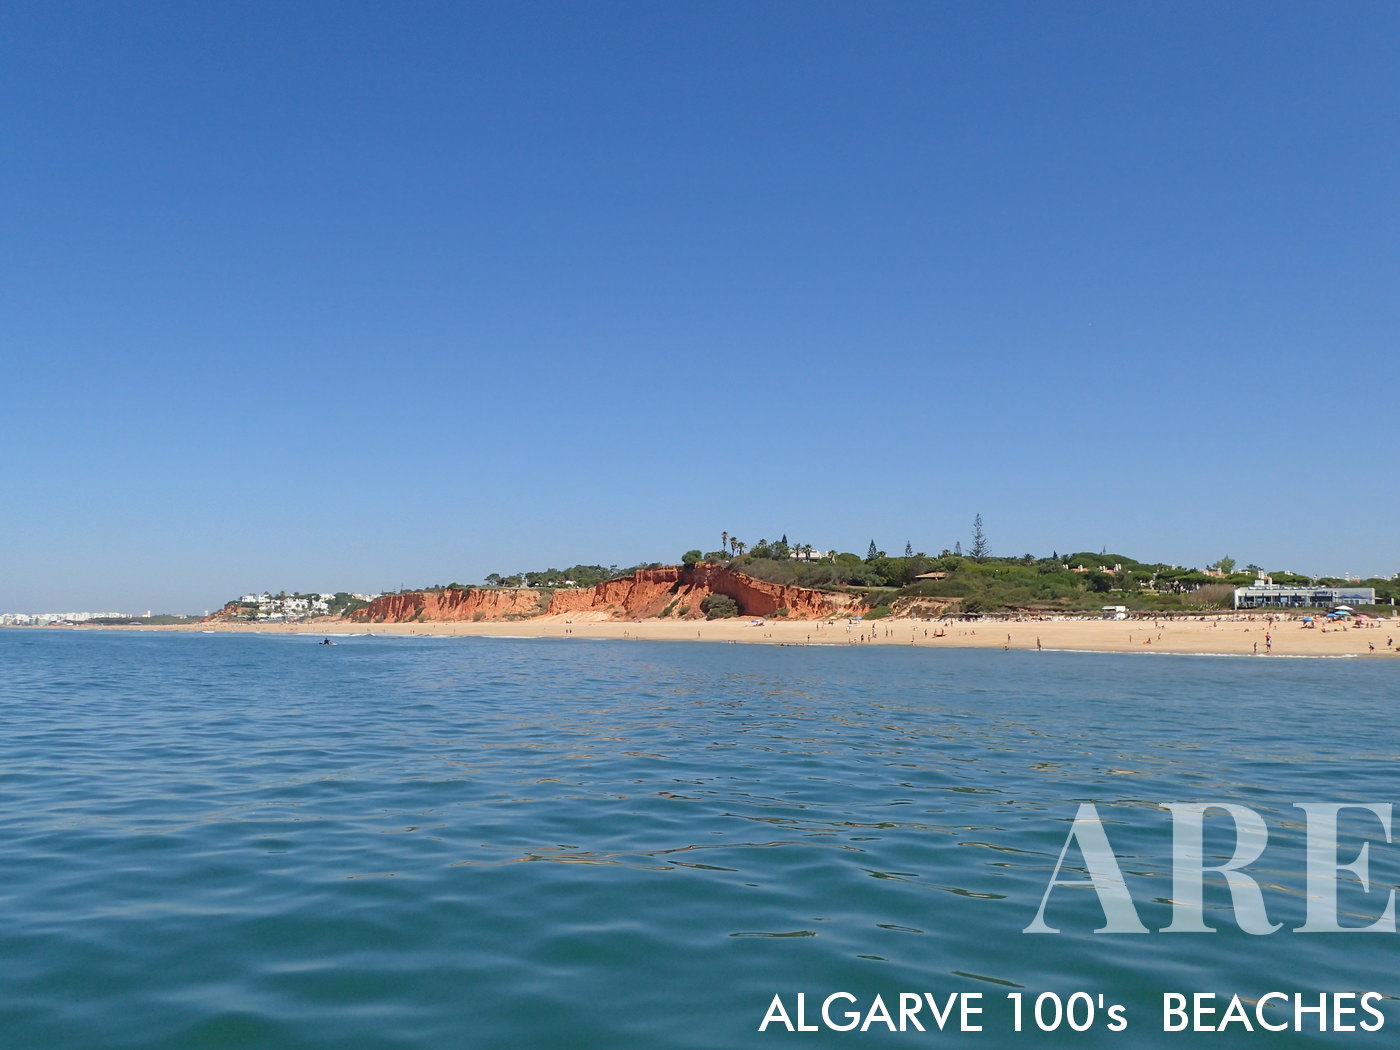 Garrão and Ancão Beaches are two of Algarve's hidden gems, nestled between the bustling areas of Quinta do Lago and Vale do Lobo. Both beaches boast golden sand and clear, azure waters, providing an idyllic setting for beachgoers to unwind and bask in the sun.